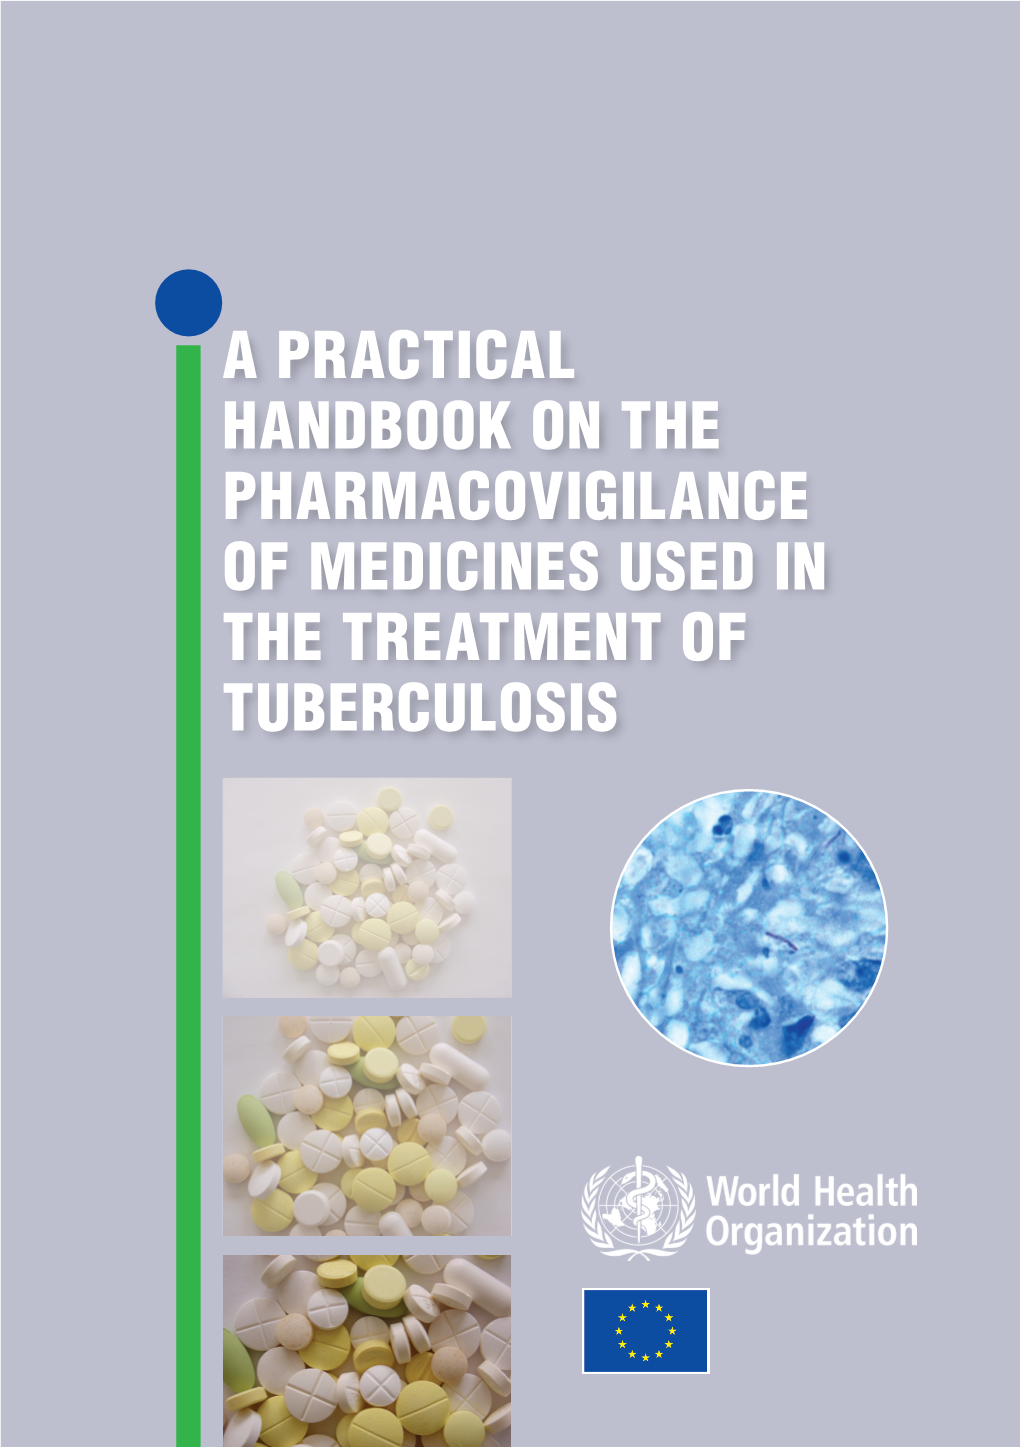 A Practical Handbook on the Pharmacovigilance of Medicines Used in the Treatment of Tuberculosis